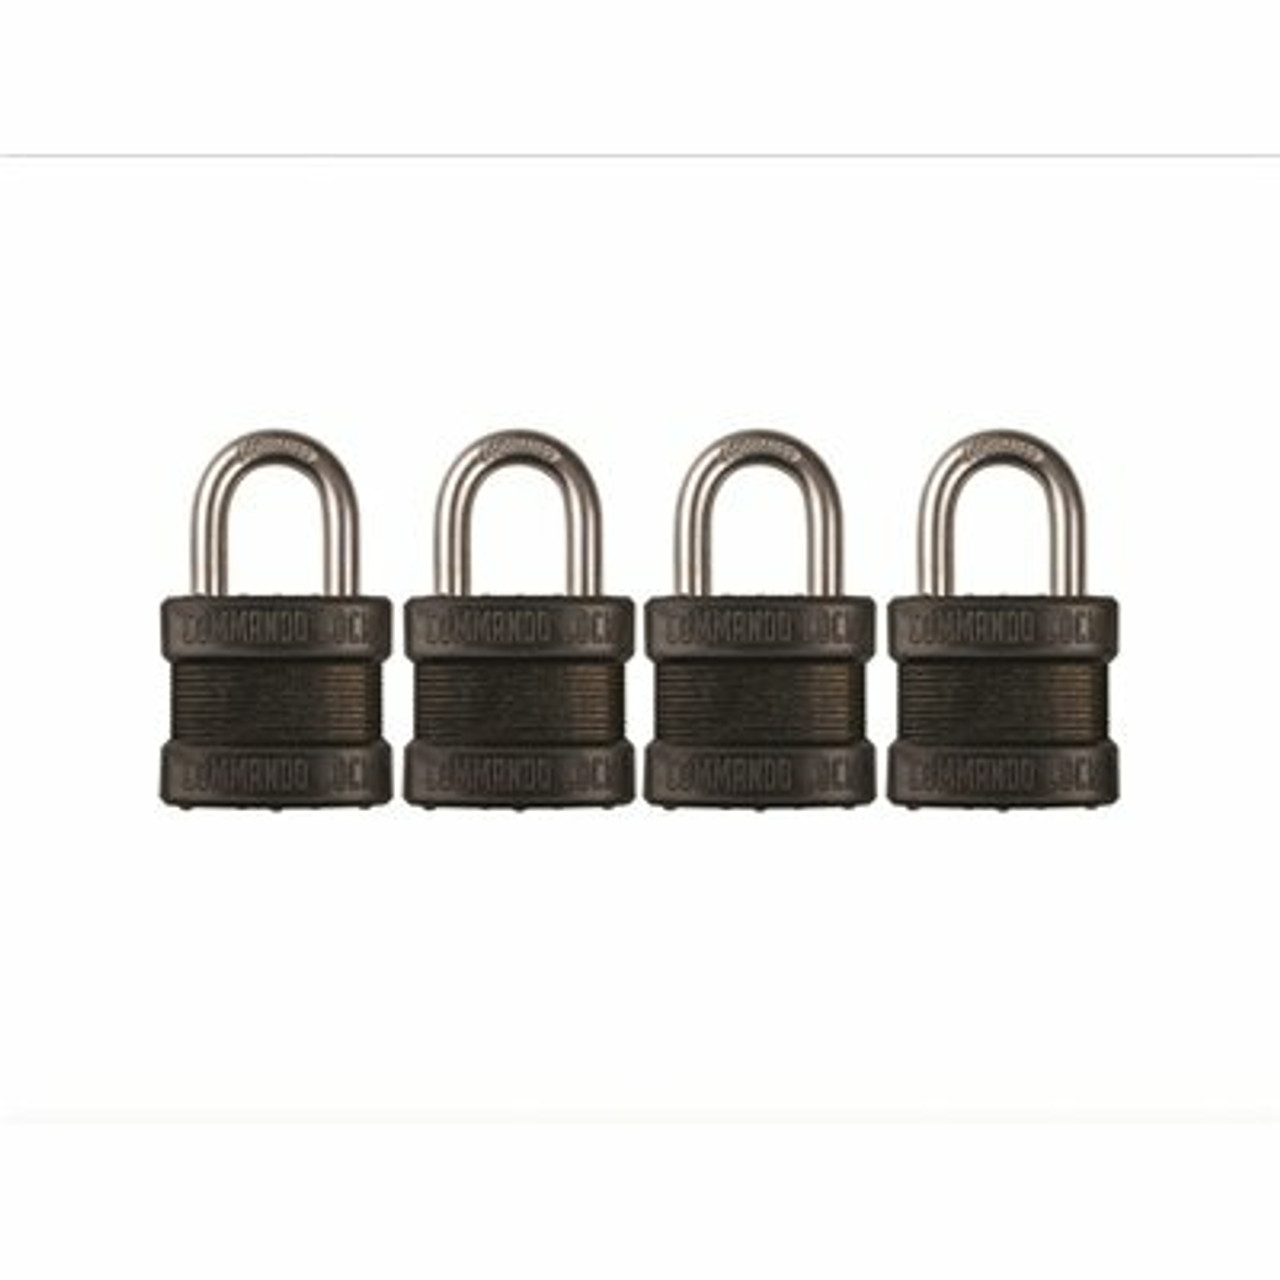 Blackout High Security 1-3/4 In. Keyed Padlock Outdoor Weather Resistant Military-Grade W 1-1/8In. Shackle (4-Pack)